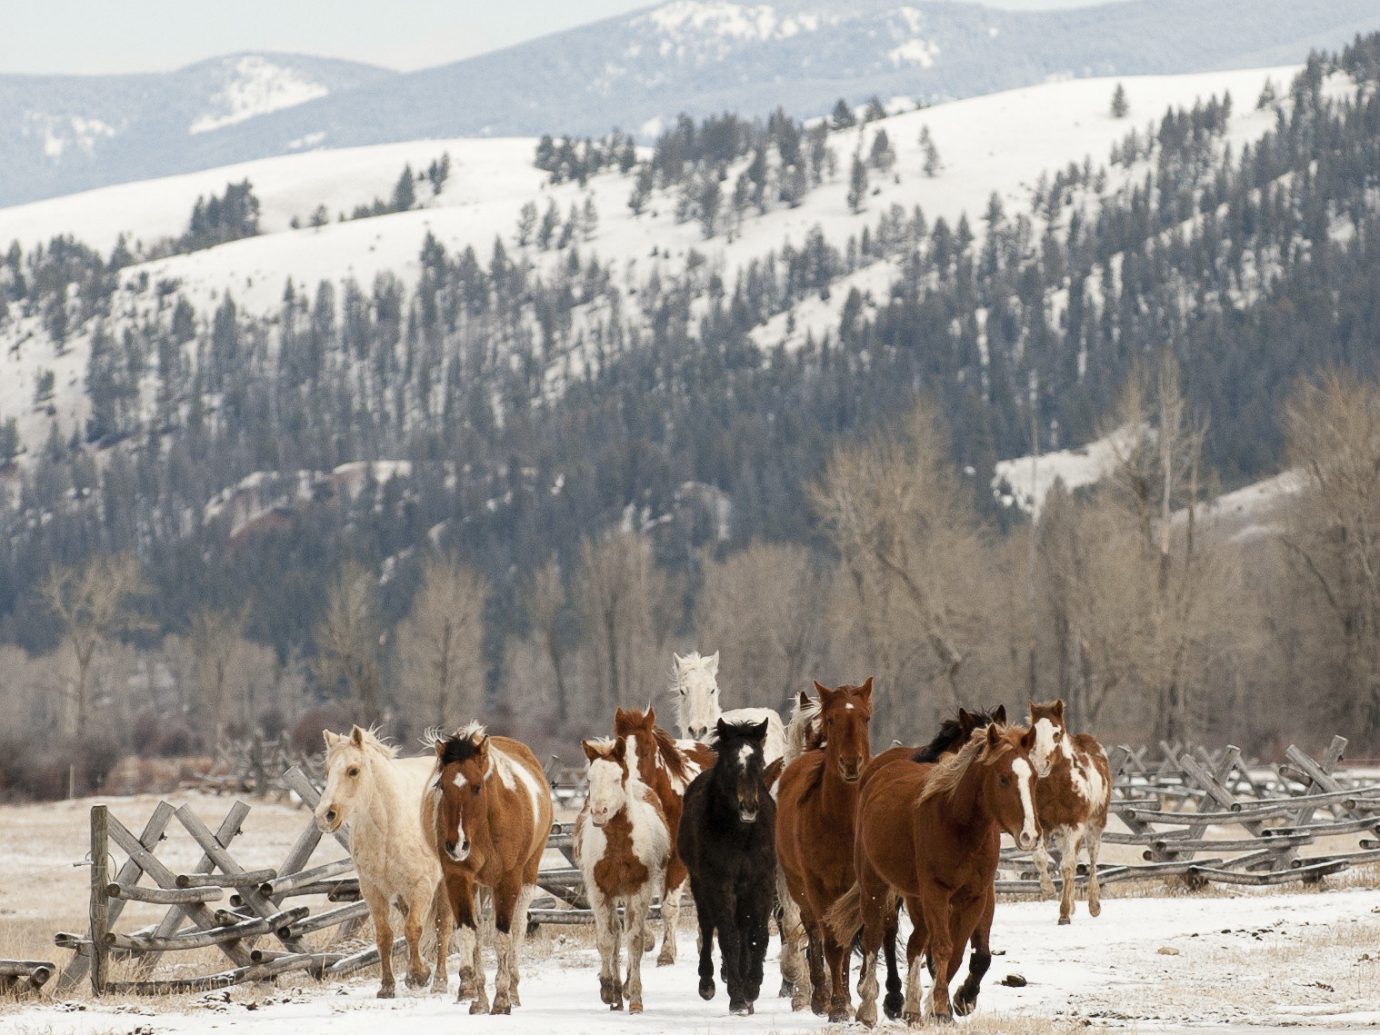 Hotels outdoor snow cow sky mountain mammal animal herd pasture brown Winter group cattle like mammal cattle mountain range horse highland